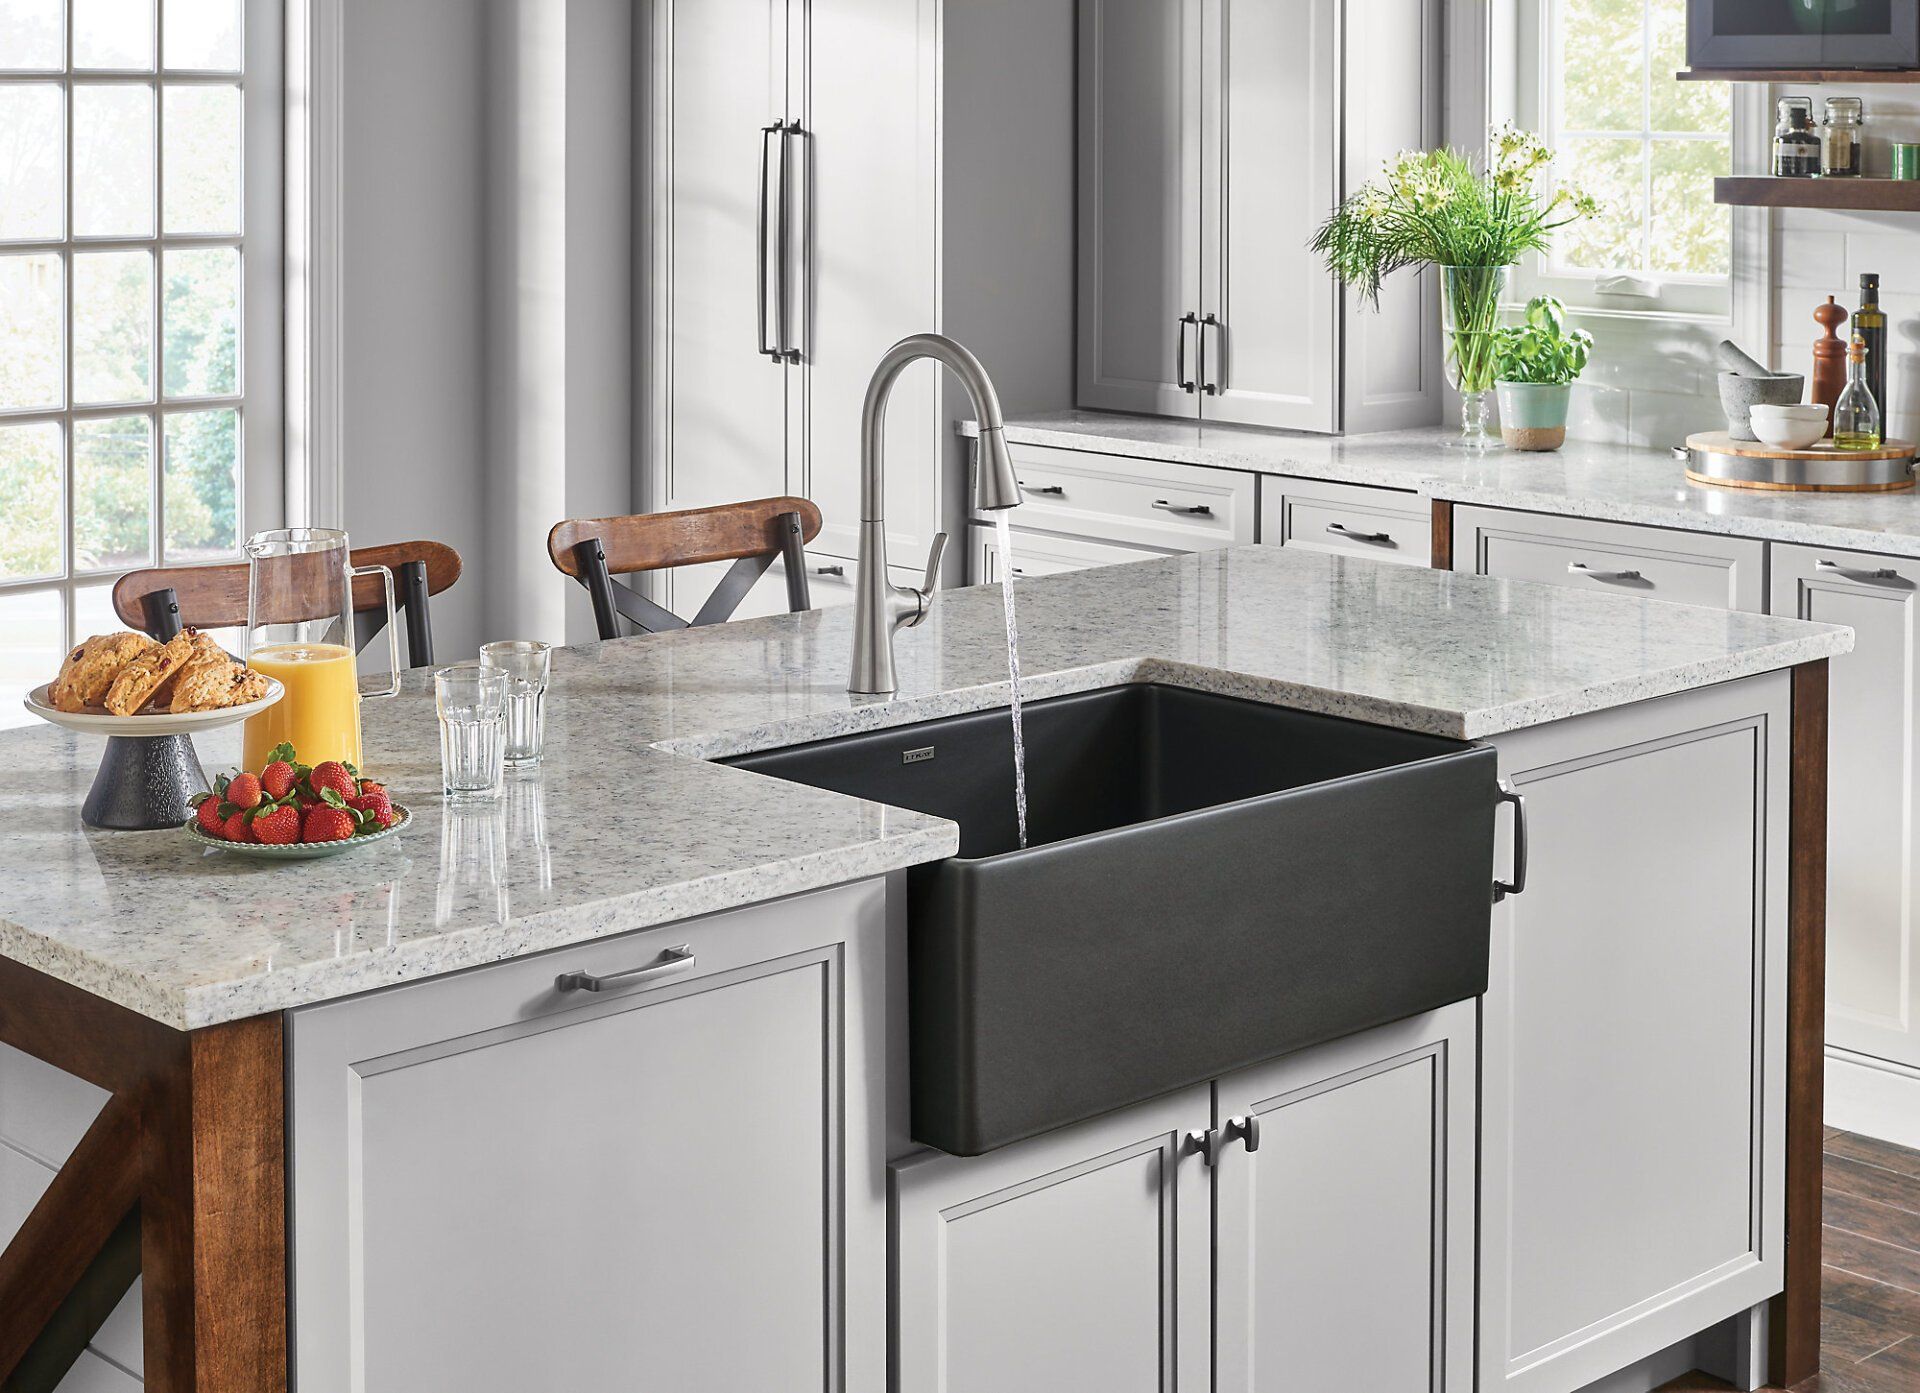 The Kohler Prolific Sink May Just Complete the Kitchen of Your Dreams